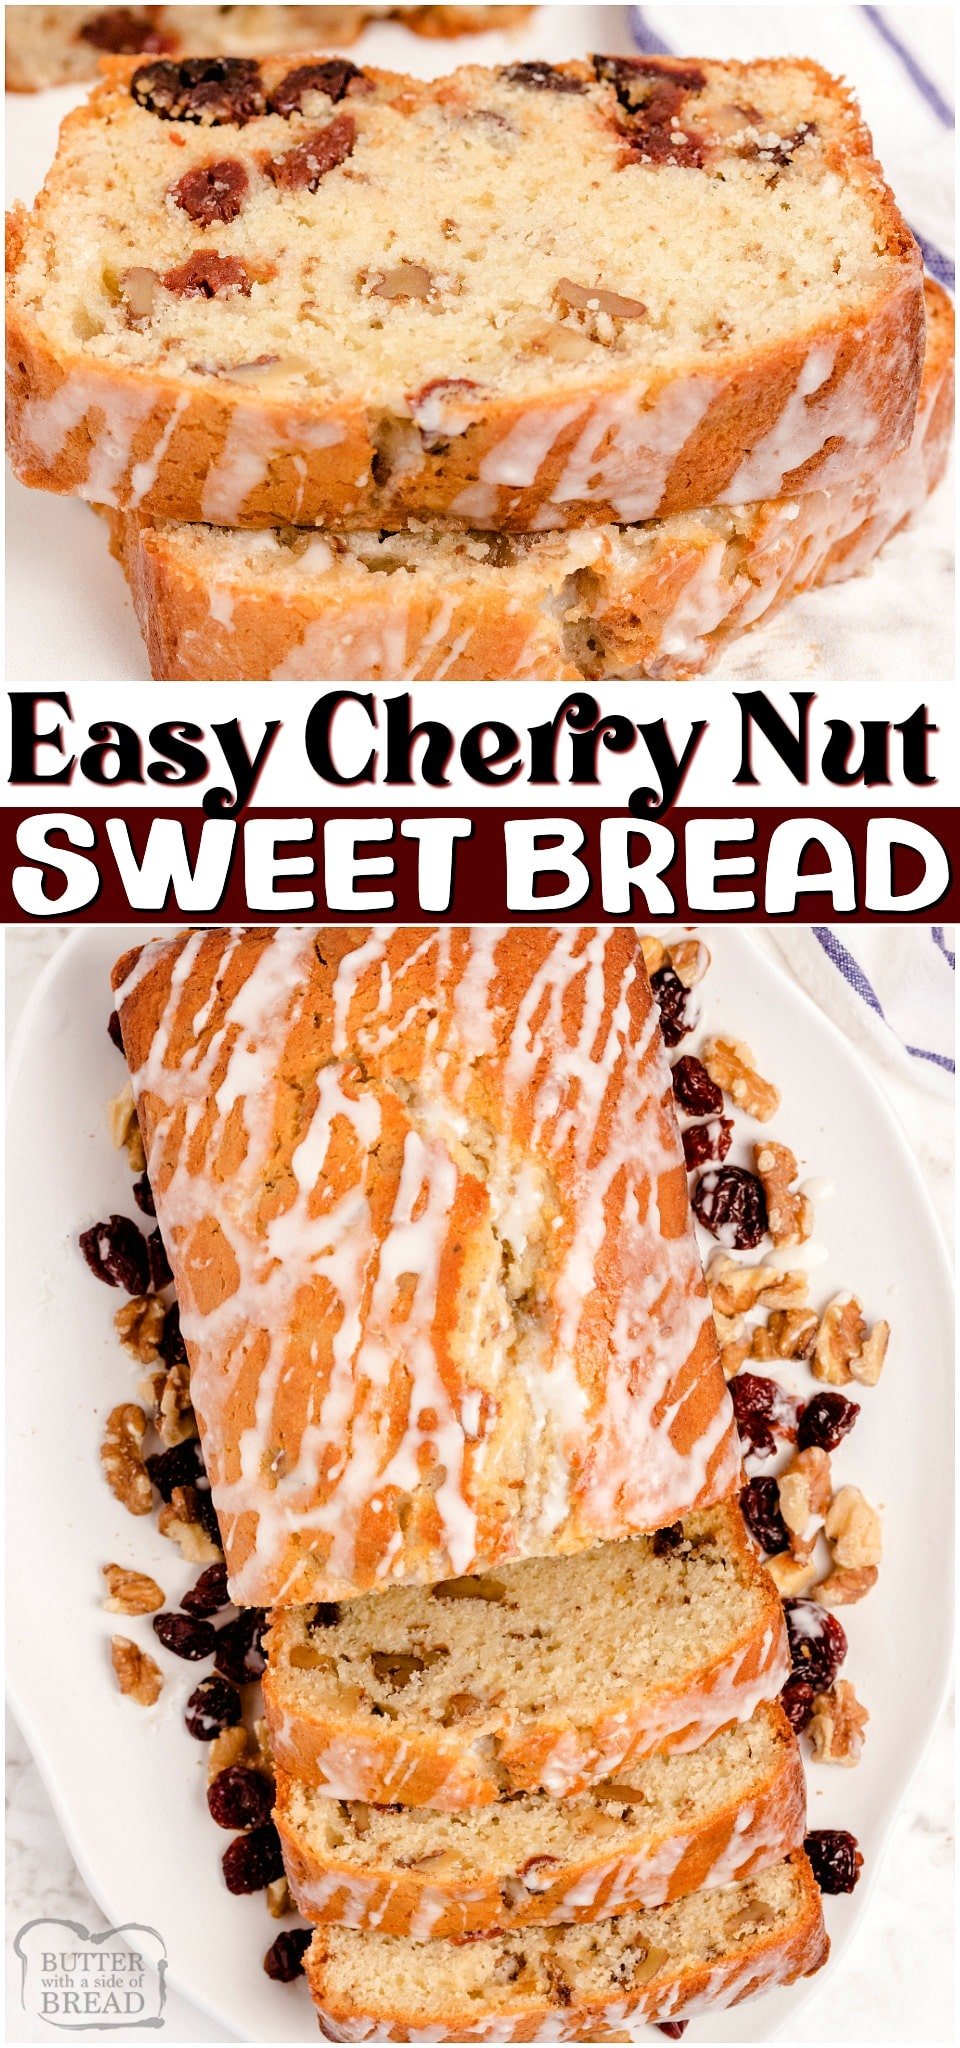 Cherry nut bread is a traditional sweet bread with bright cherry flavor! Lovely cherry quick bread recipe with nuts and a simple vanilla glaze that's perfect for breakfast or a treat. 